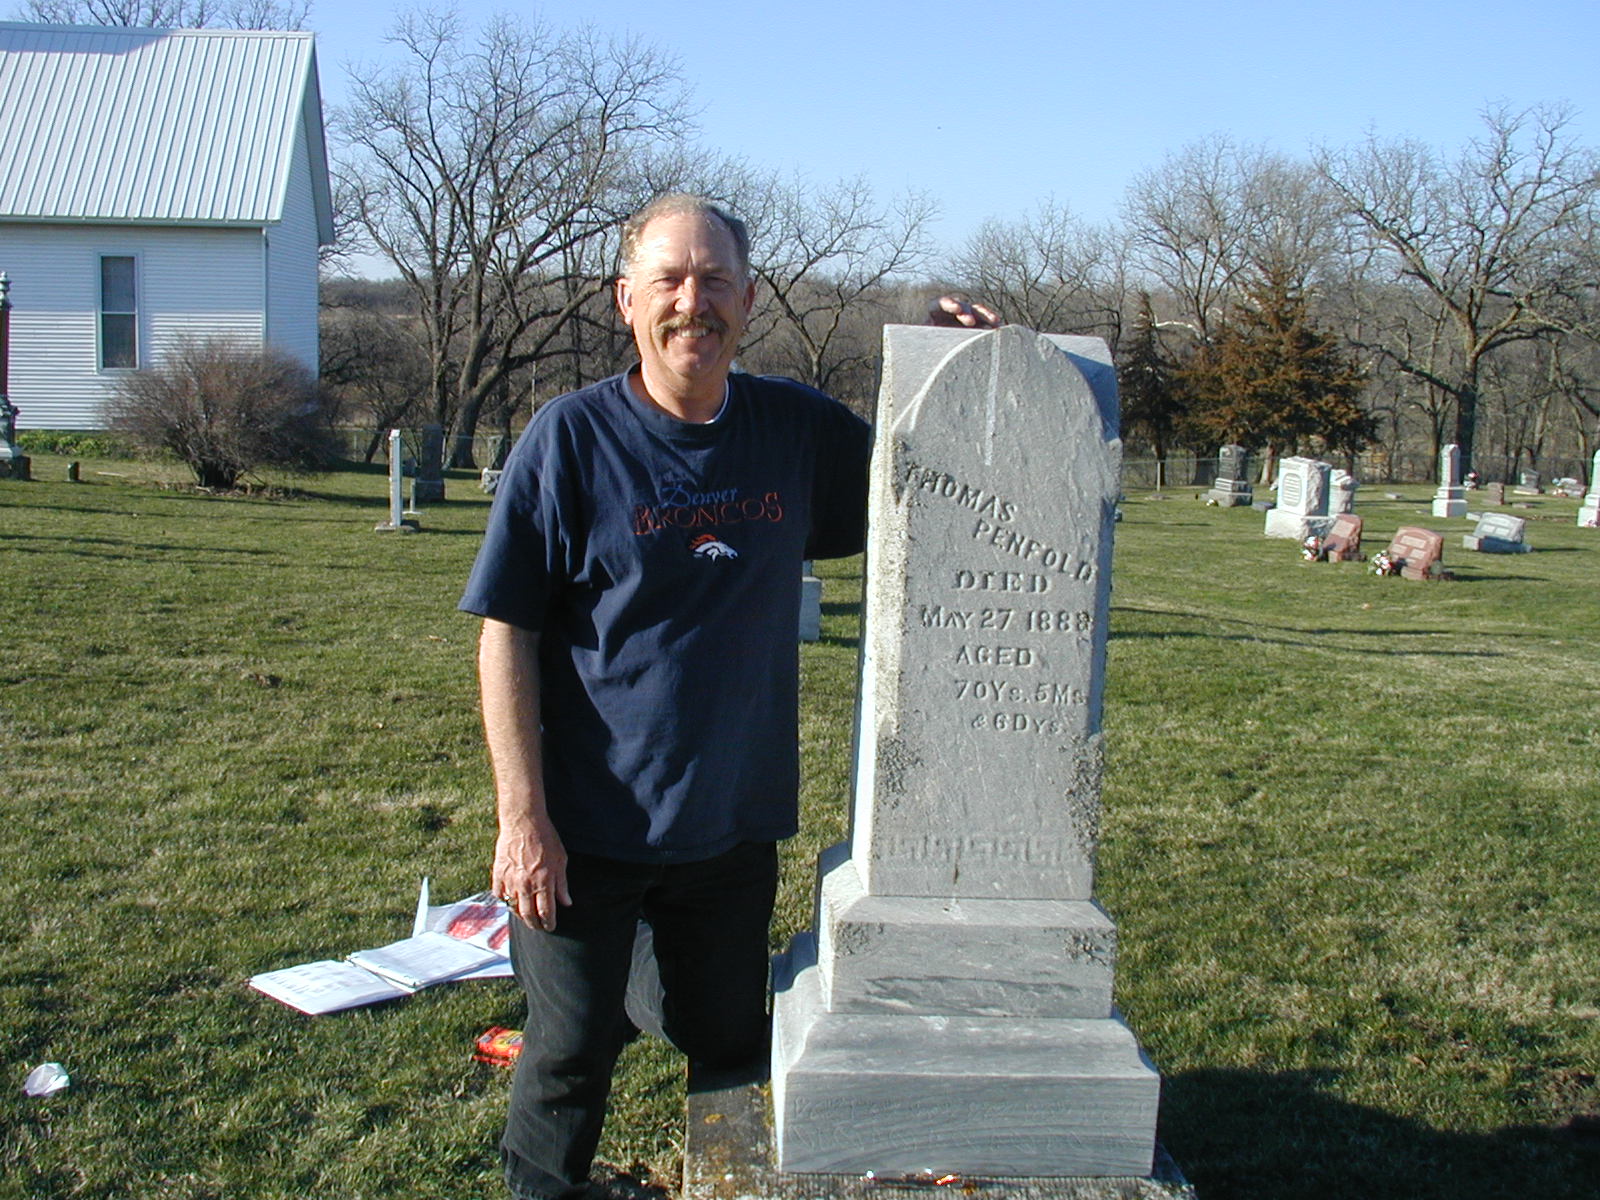 Ron Penfold on the Thomas Penfold side of the tombstone